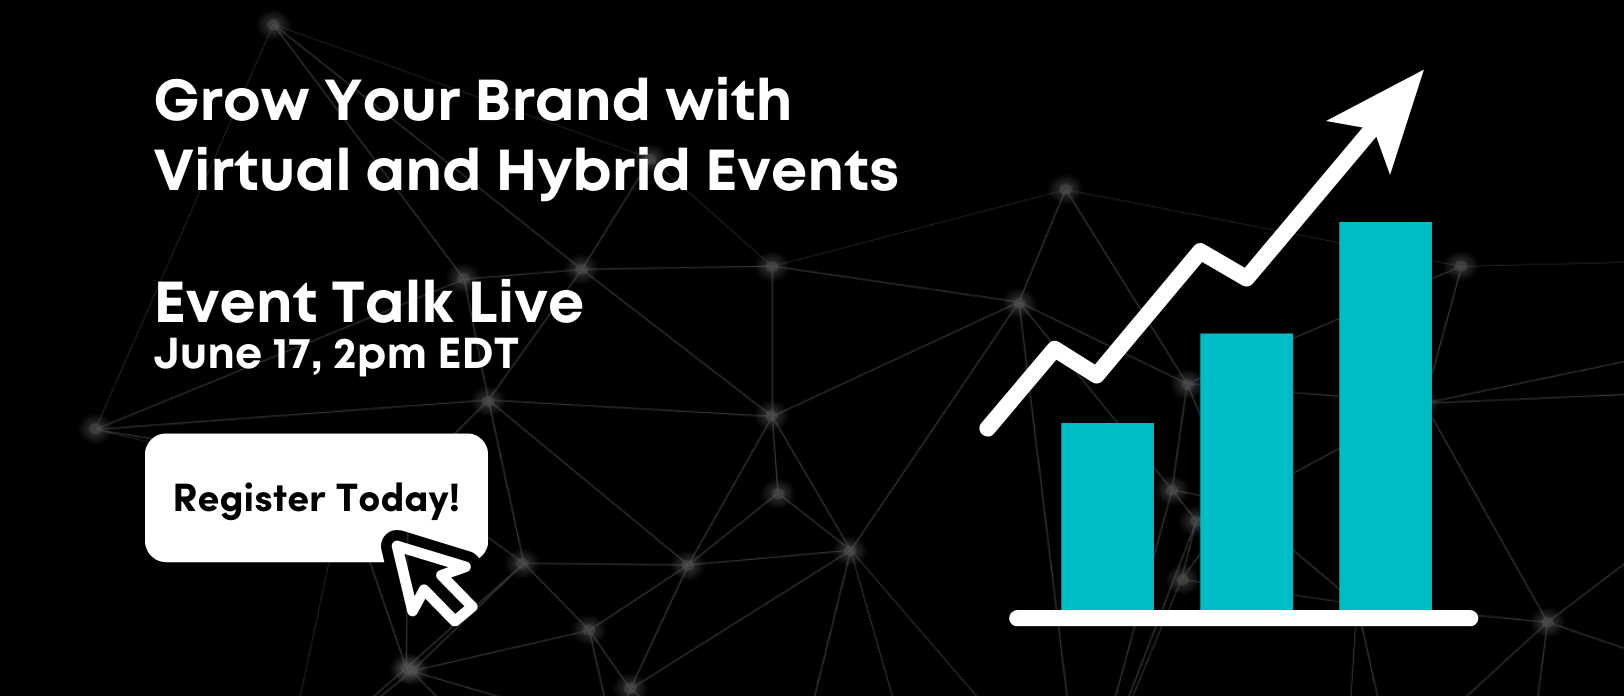 Event Talk Live: Grow Your Brand with Virtual and Hybrid Events, Online, United States